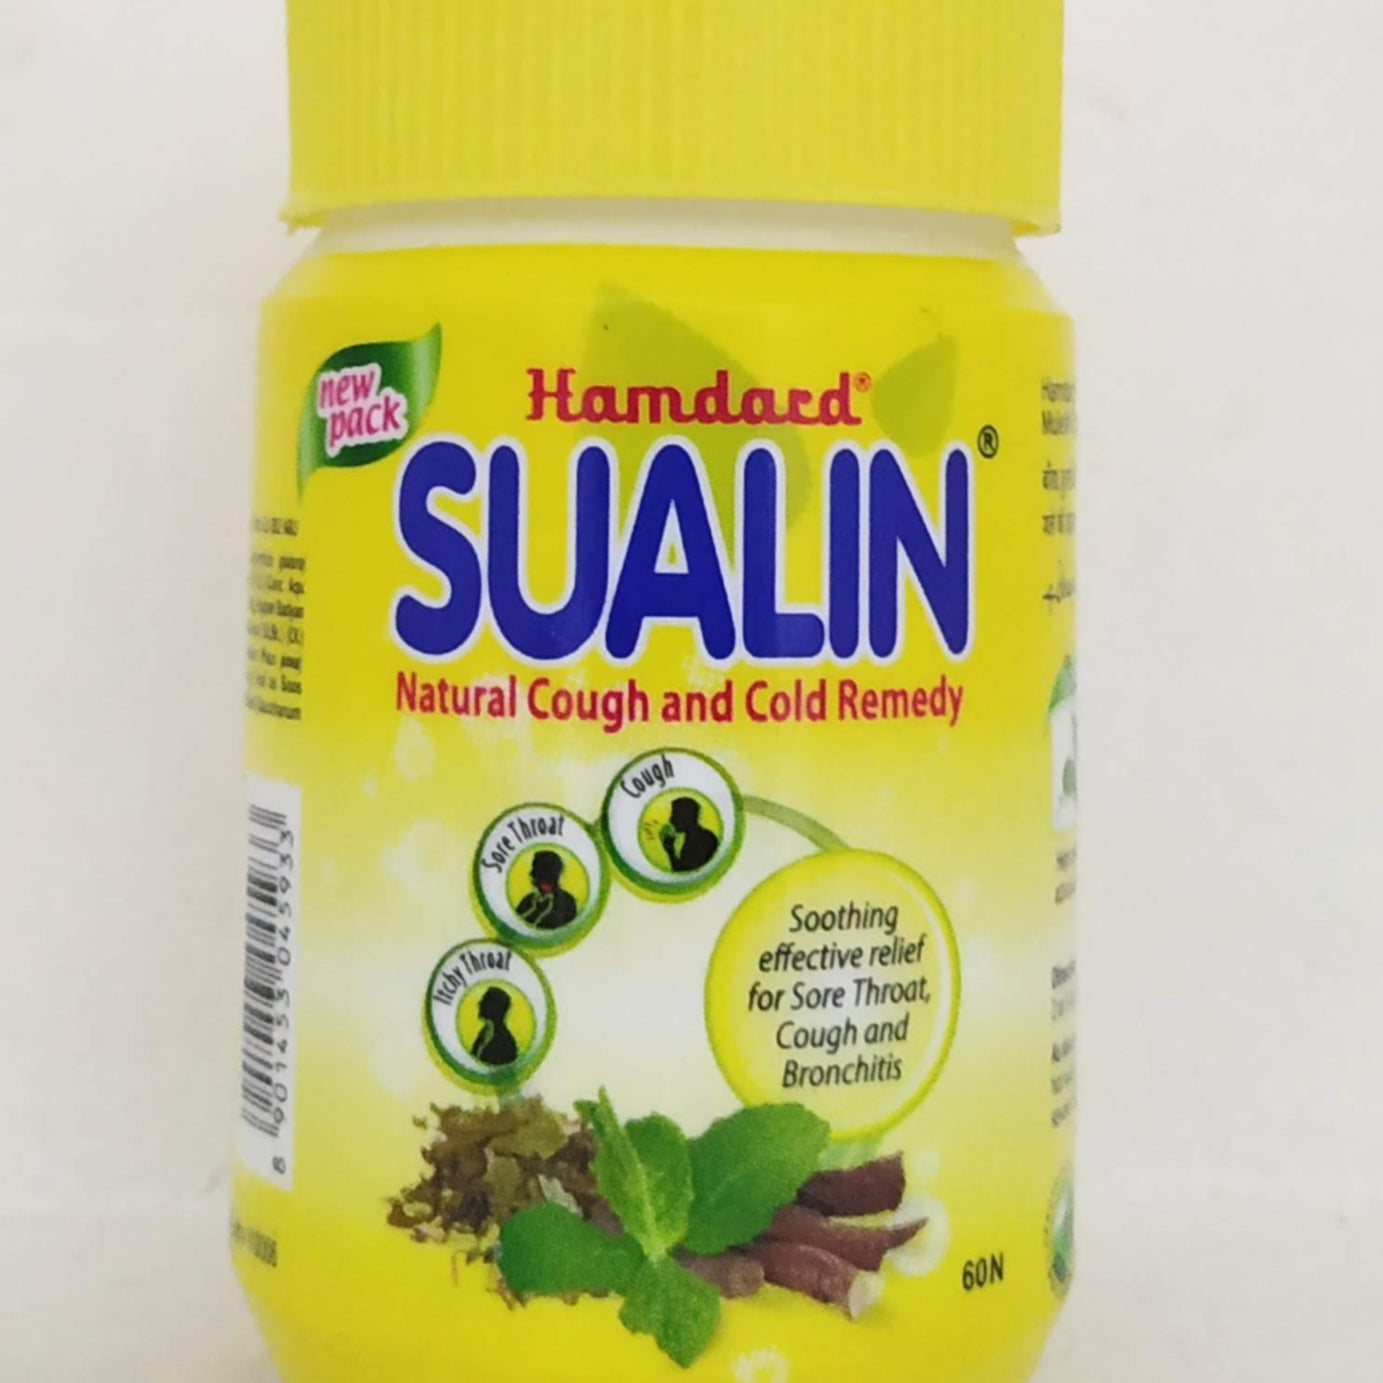 Shop Sualin tablets - 60Tablets at price 65.00 from Hamdard Online - Ayush Care